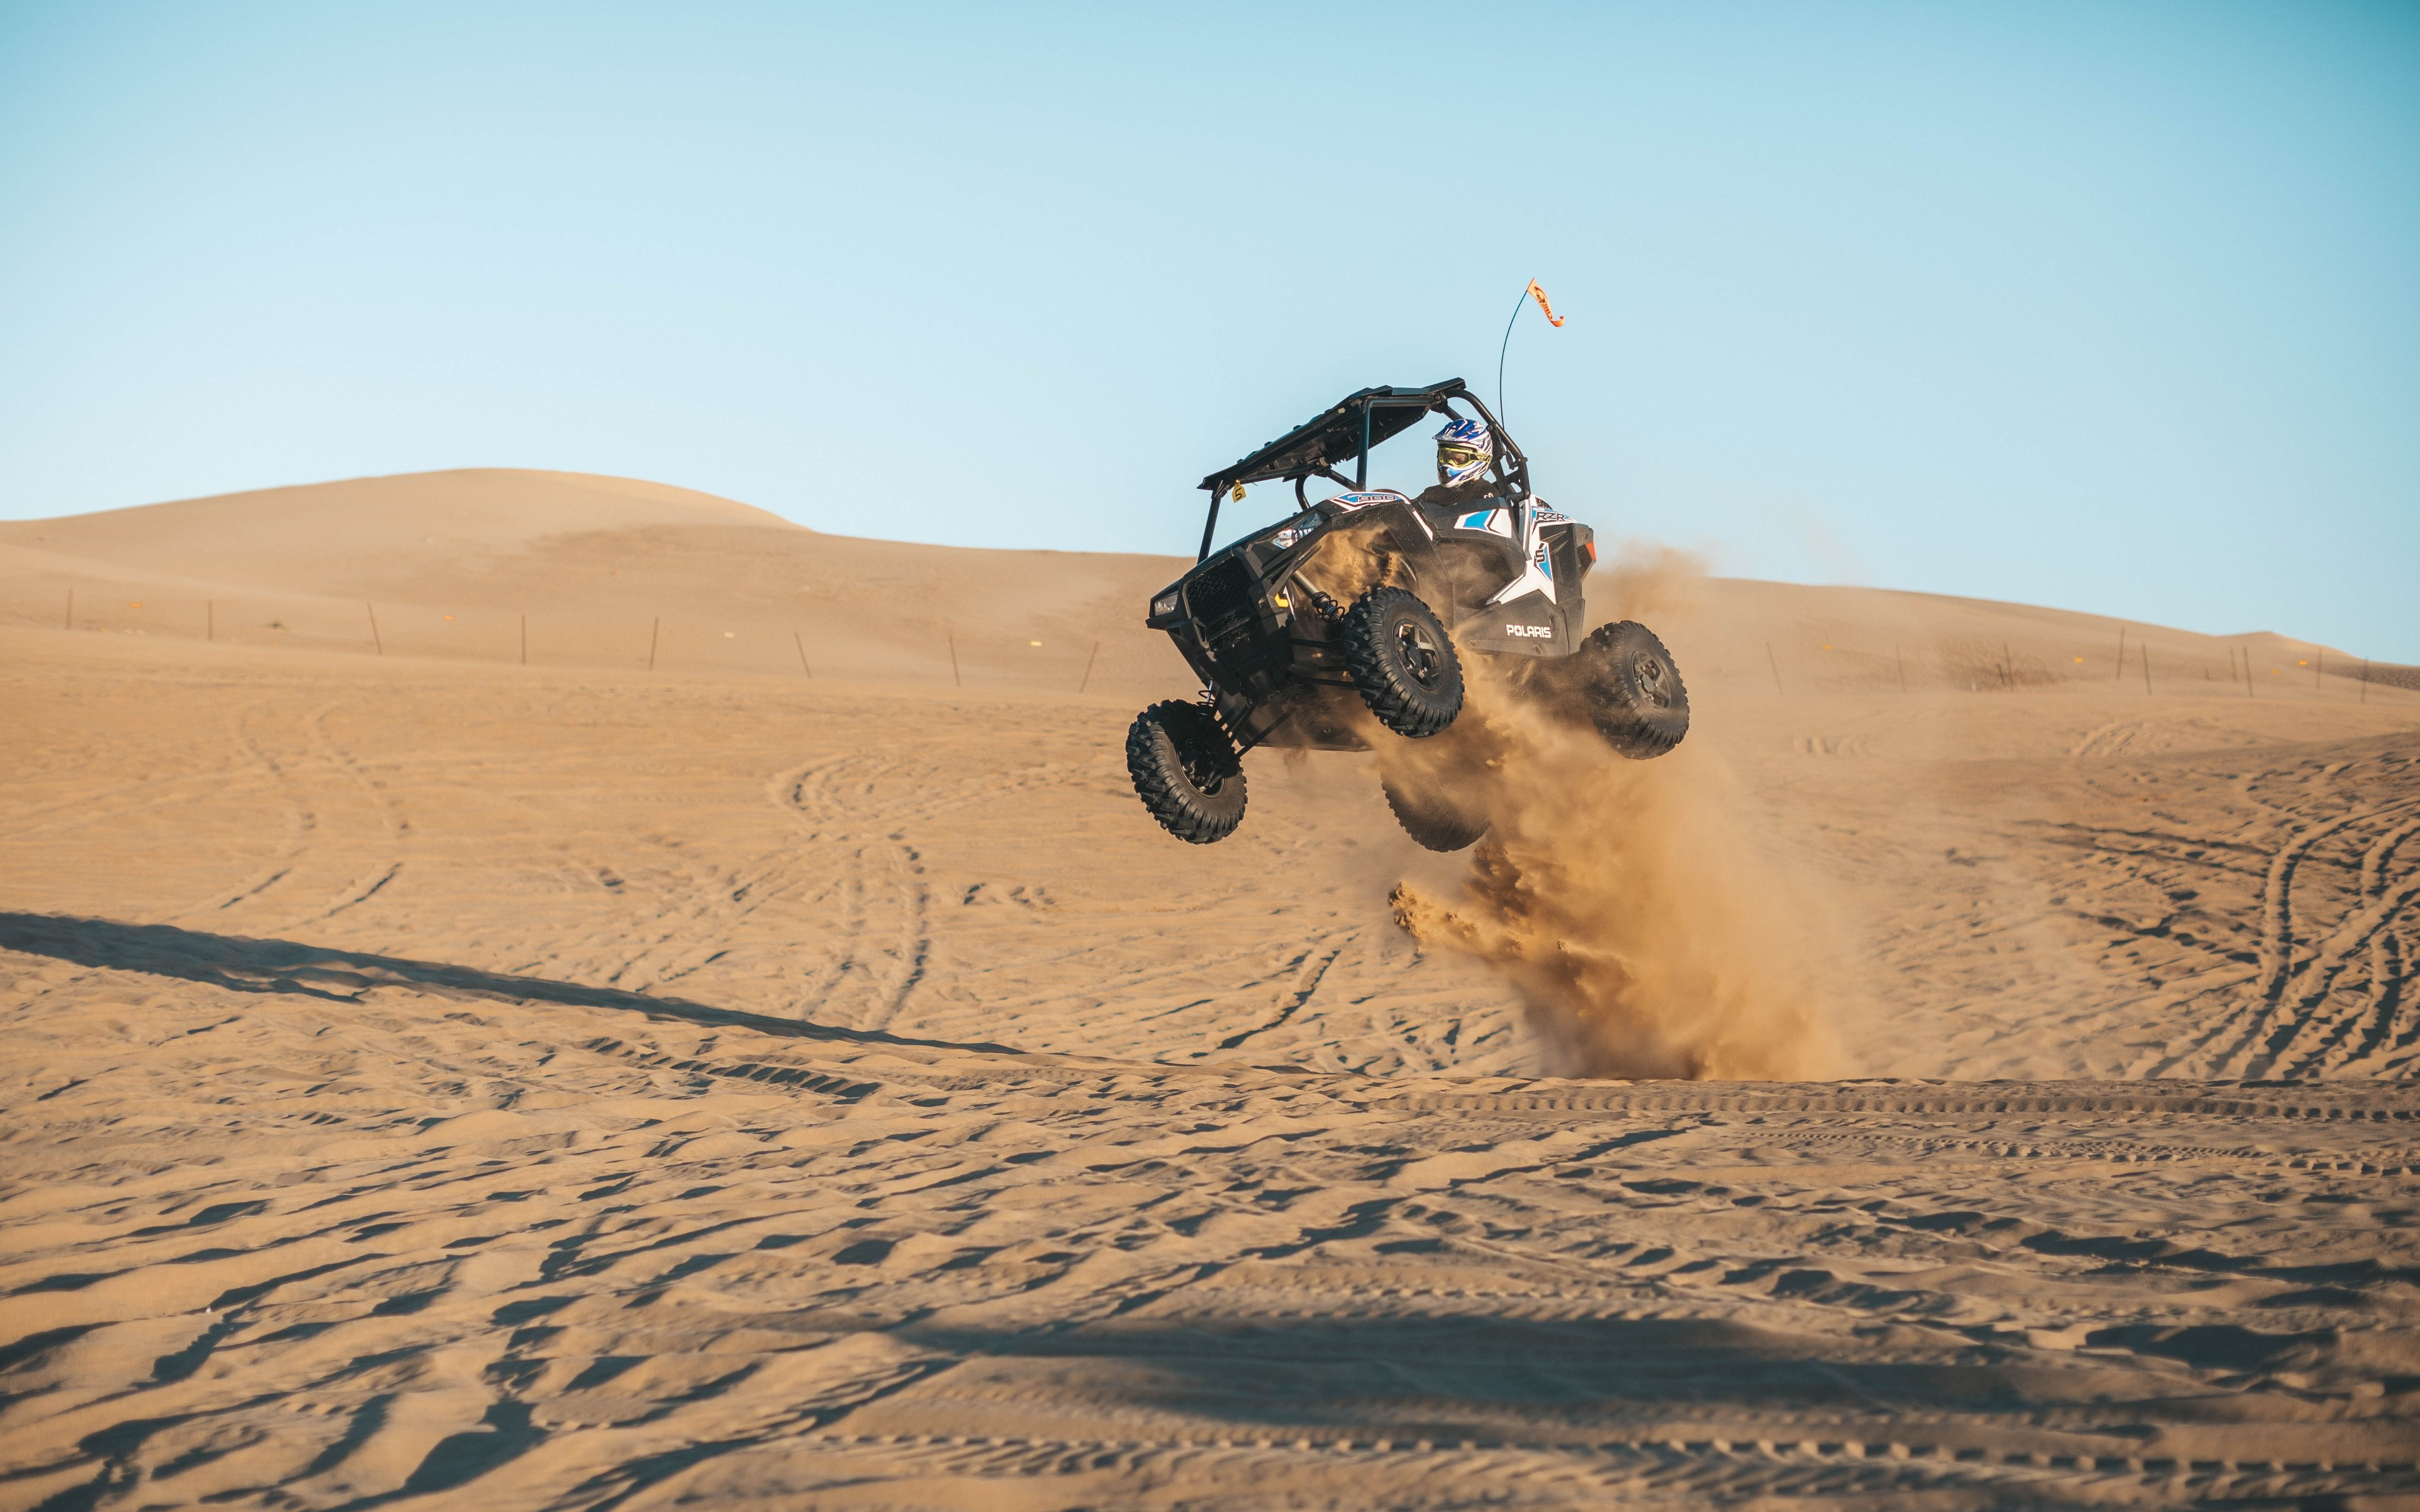 With ATV on the the sand dunes wallpaper 3840x2400